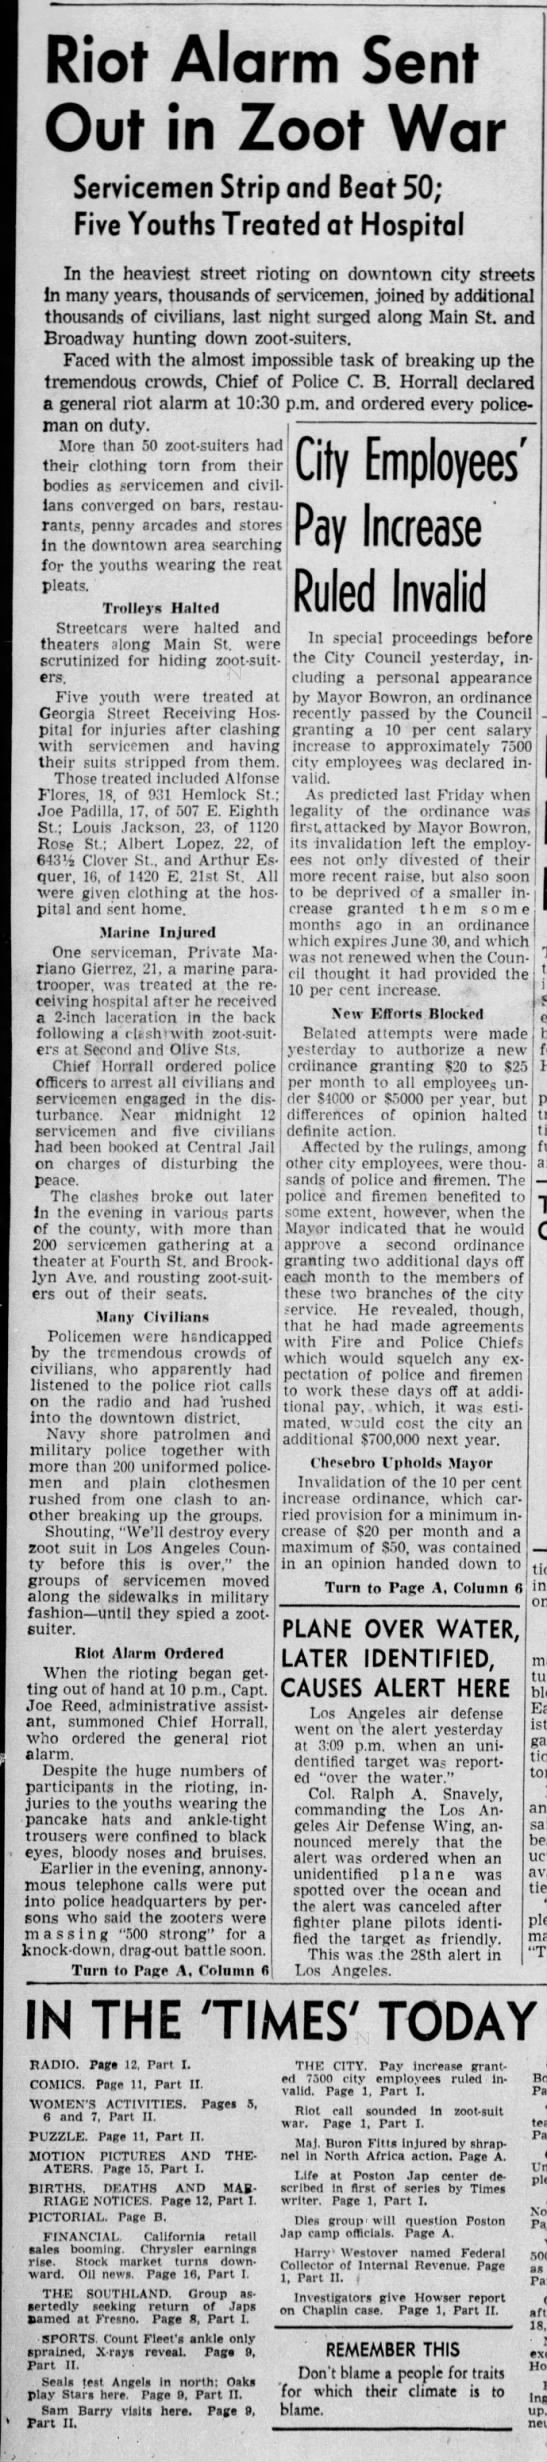 Los Angeles Times coverage of the Zoot Suit Riots in June 1943 - 